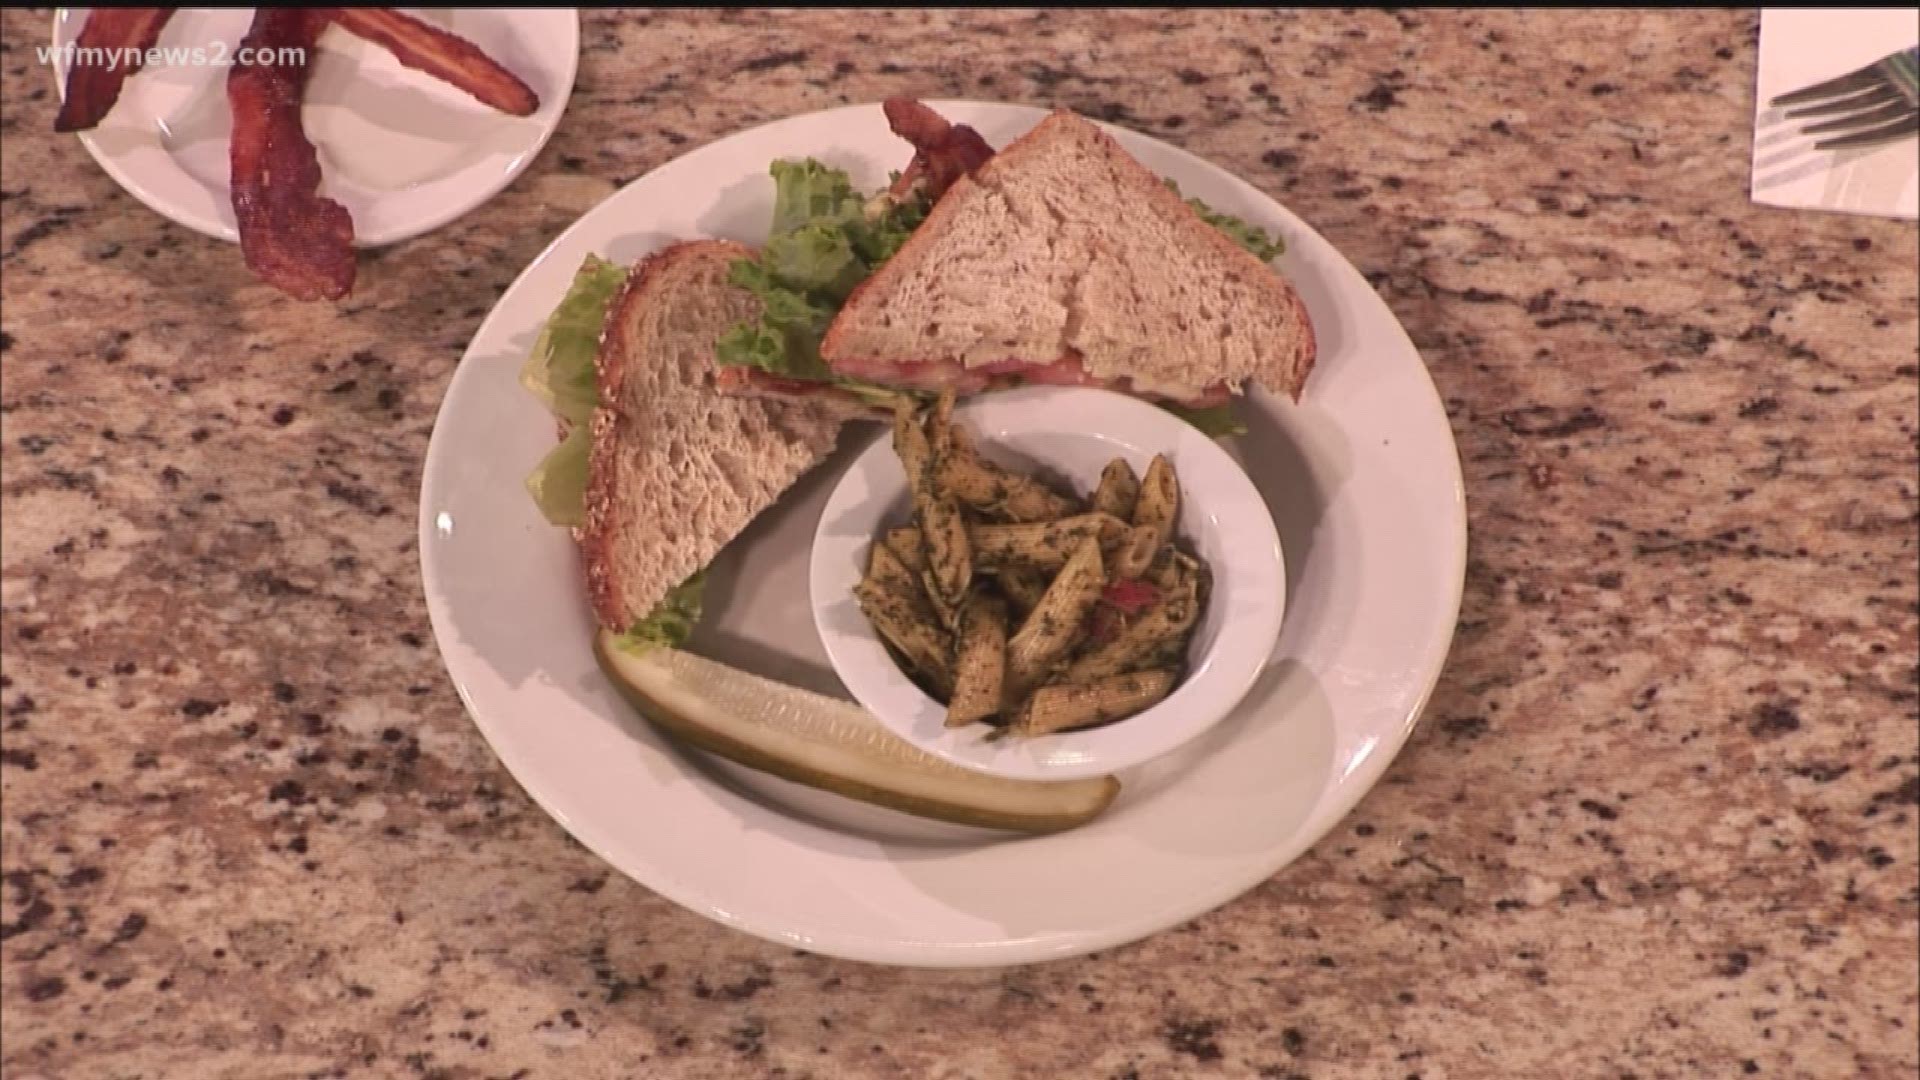 Famous Toastery is back in studio with recipes for a BLT with a Twist and an avocado omelet.